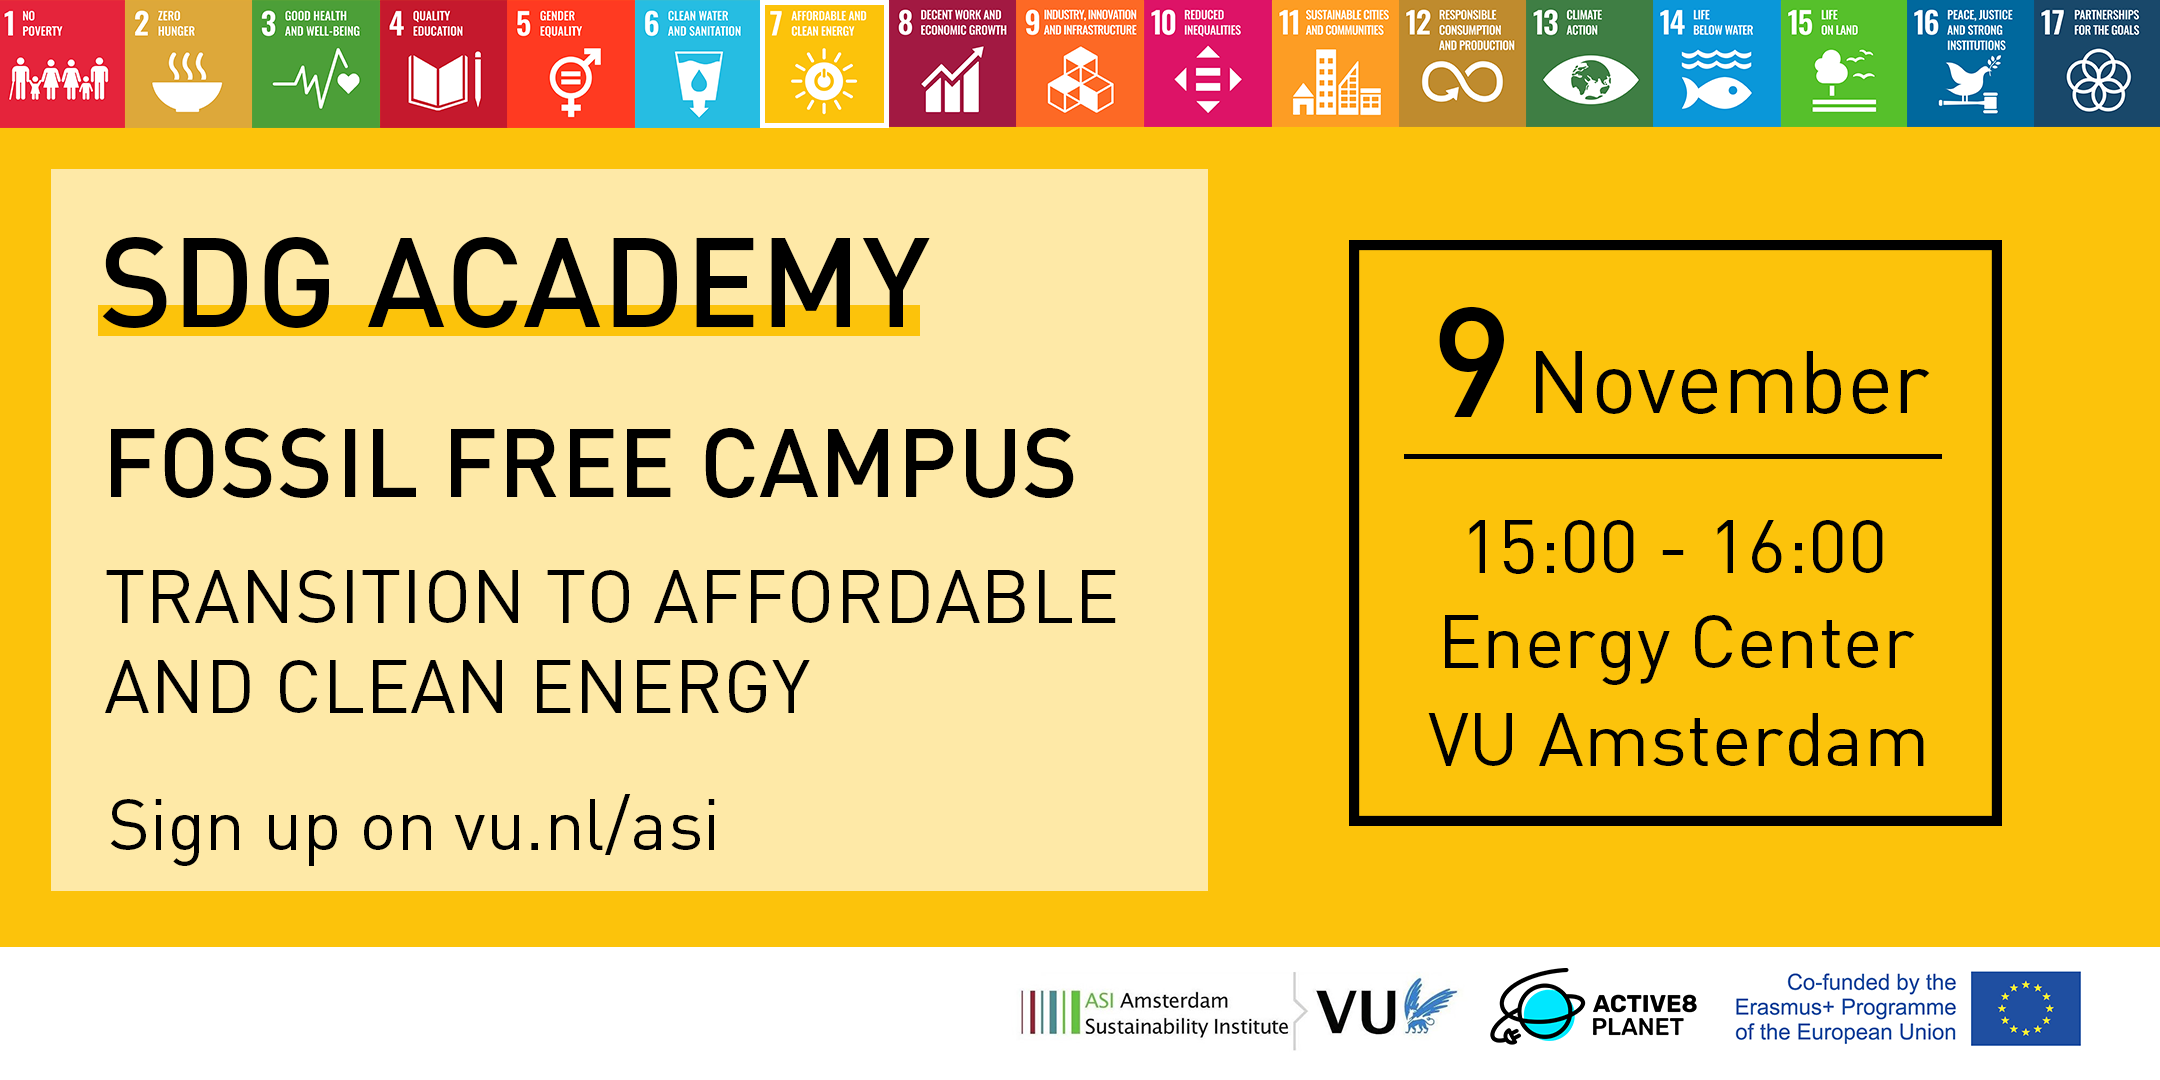 Poster for event SDG Academy